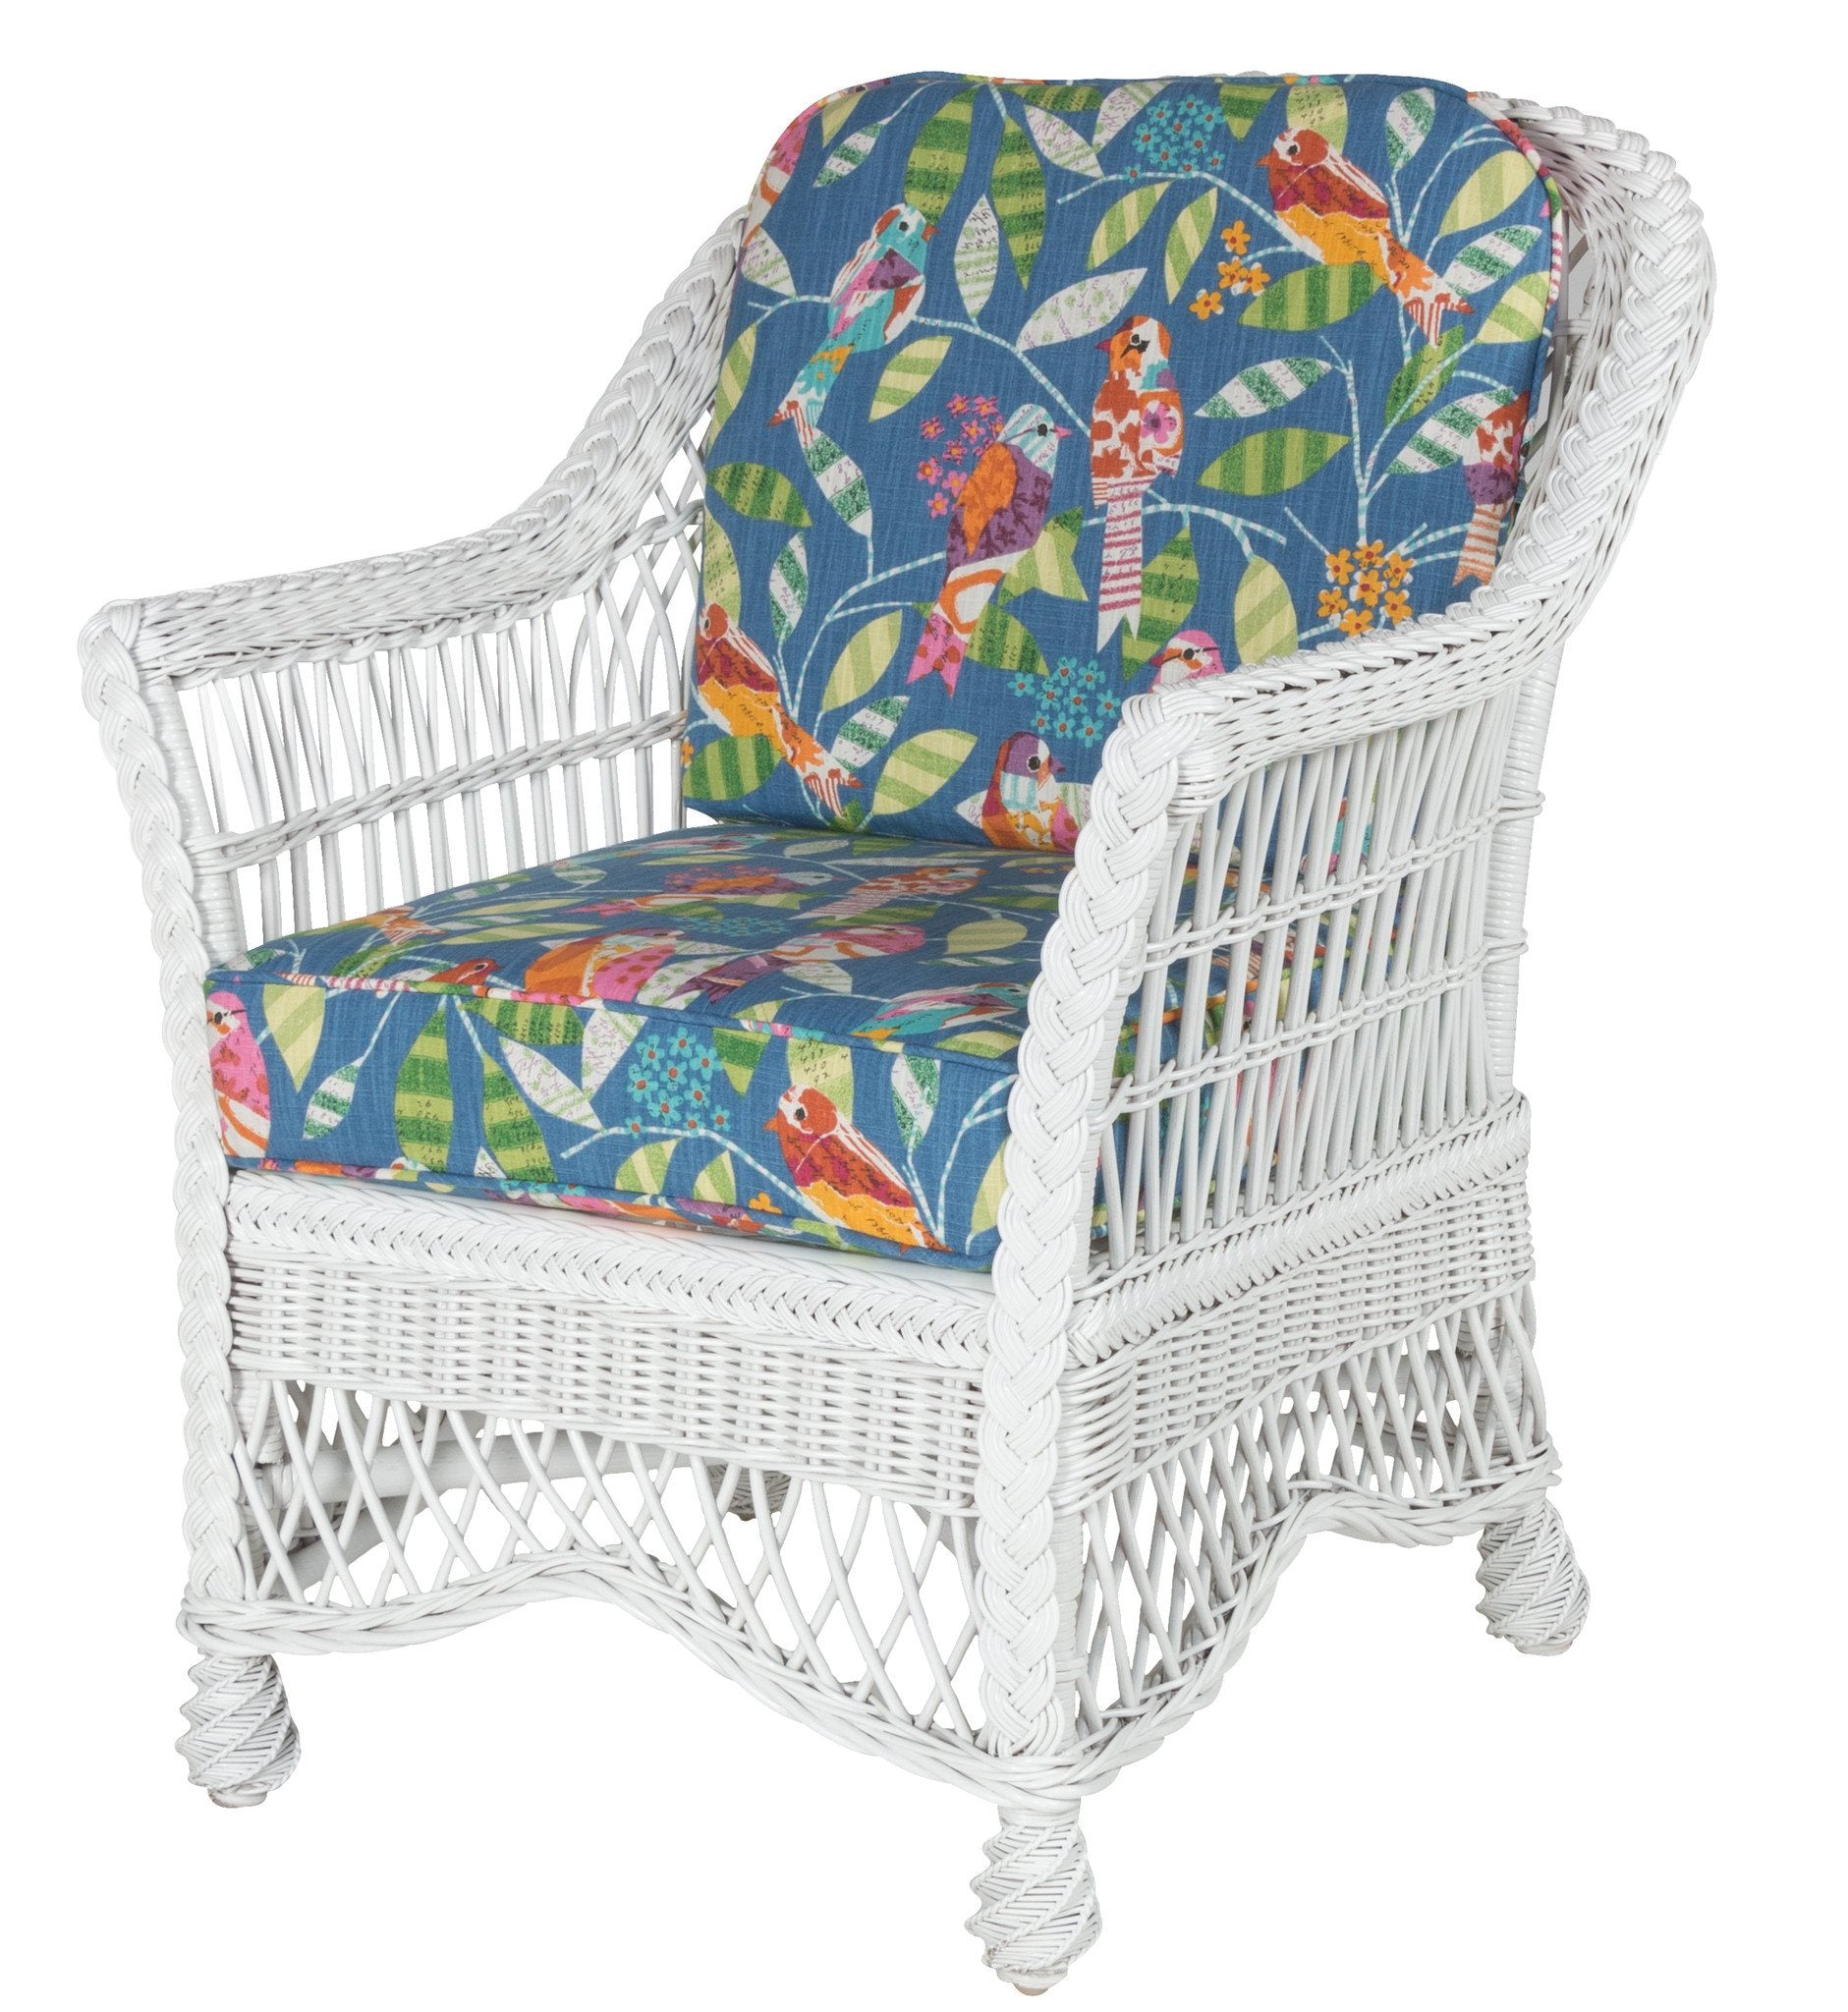 Designer Wicker & Rattan By Tribor Naples Dining Arm Chair by Designer Wicker from Tribor Dining Chair - Rattan Imports